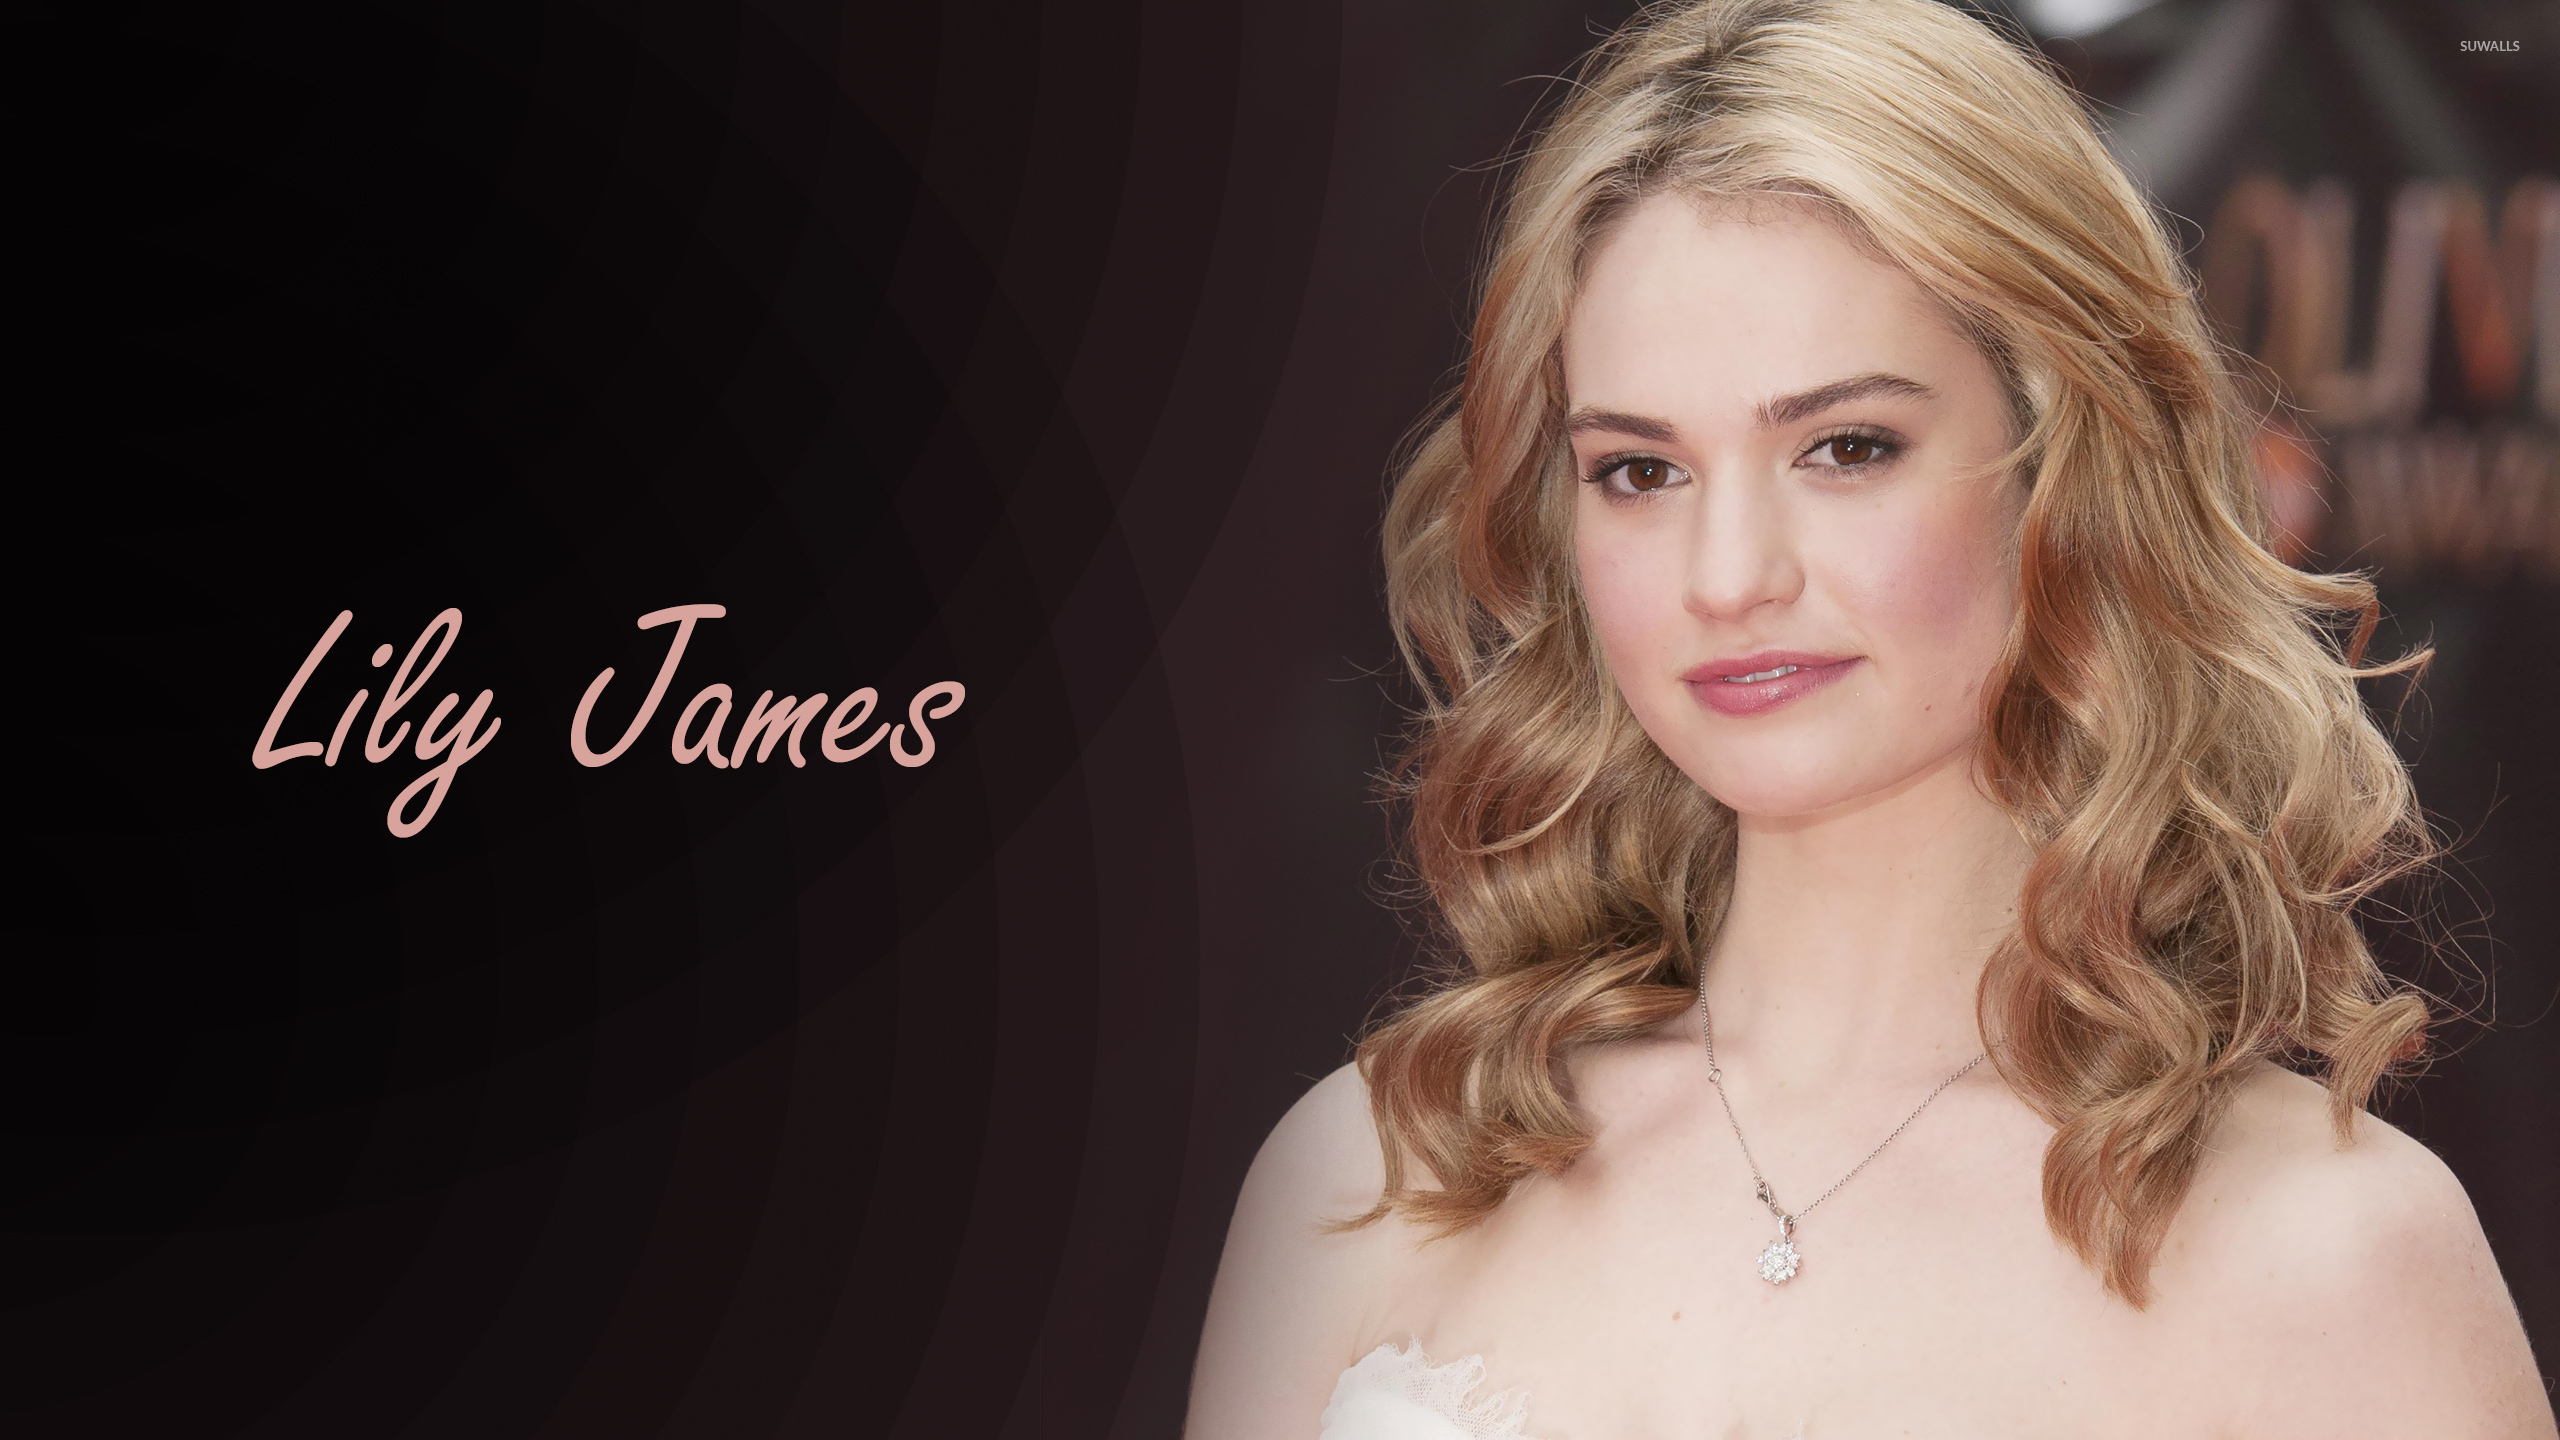 Lily James with loose curls Wallpaper 2560x1440.